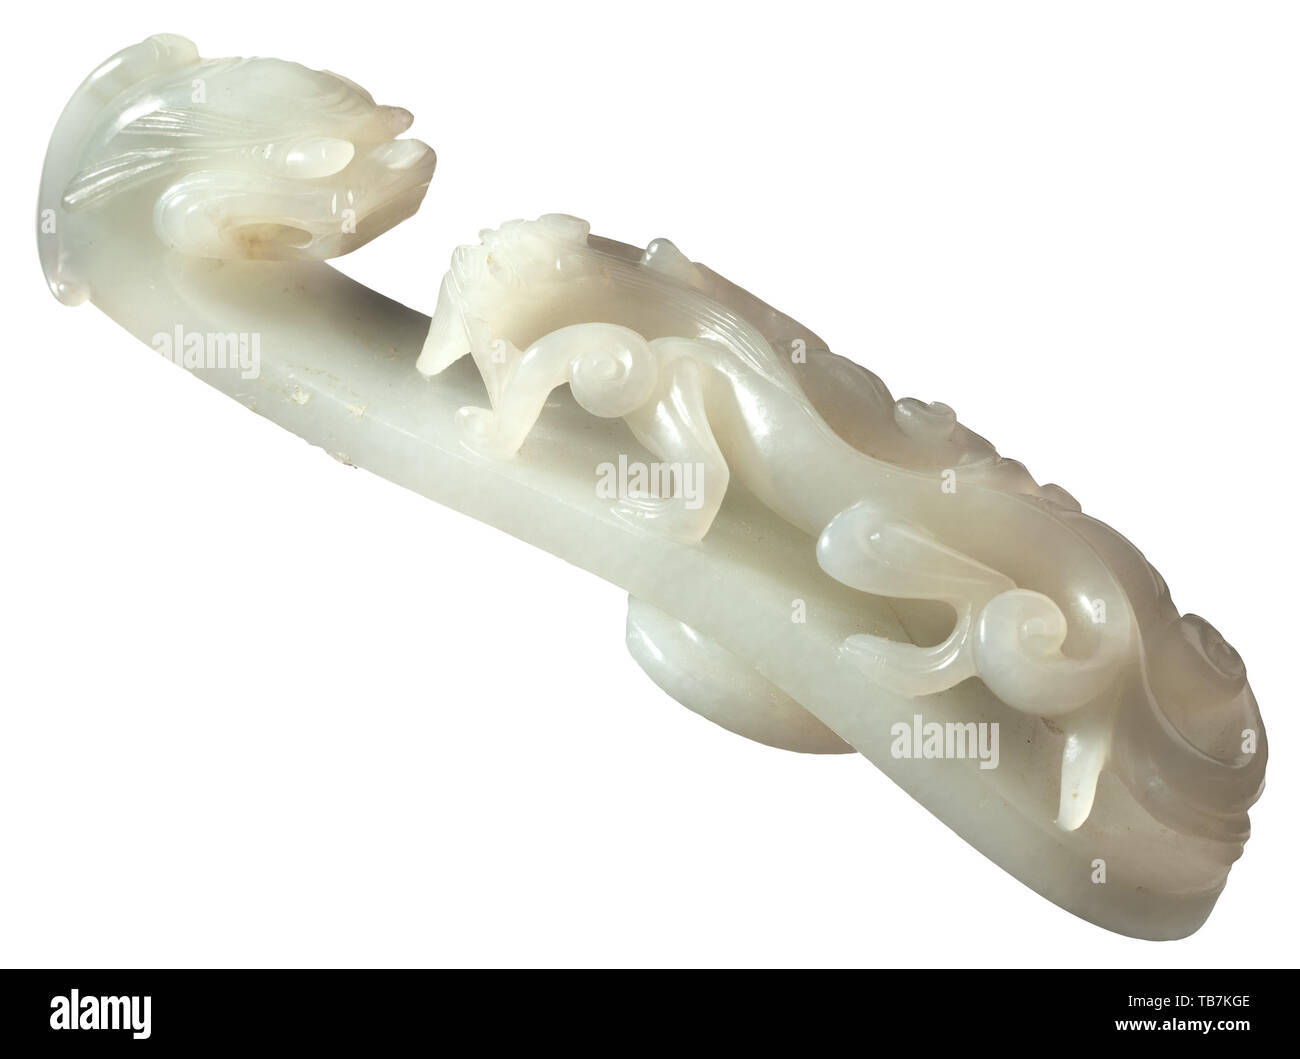 A Chinese jade 'Dragon' belt hook, Qing dynasty, 18th century, Curved belt hook of greenish-white jade with pierced dragon at top. Length 13.2 cm. China, Chinese, historic, historical, Additional-Rights-Clearance-Info-Not-Available Stock Photo